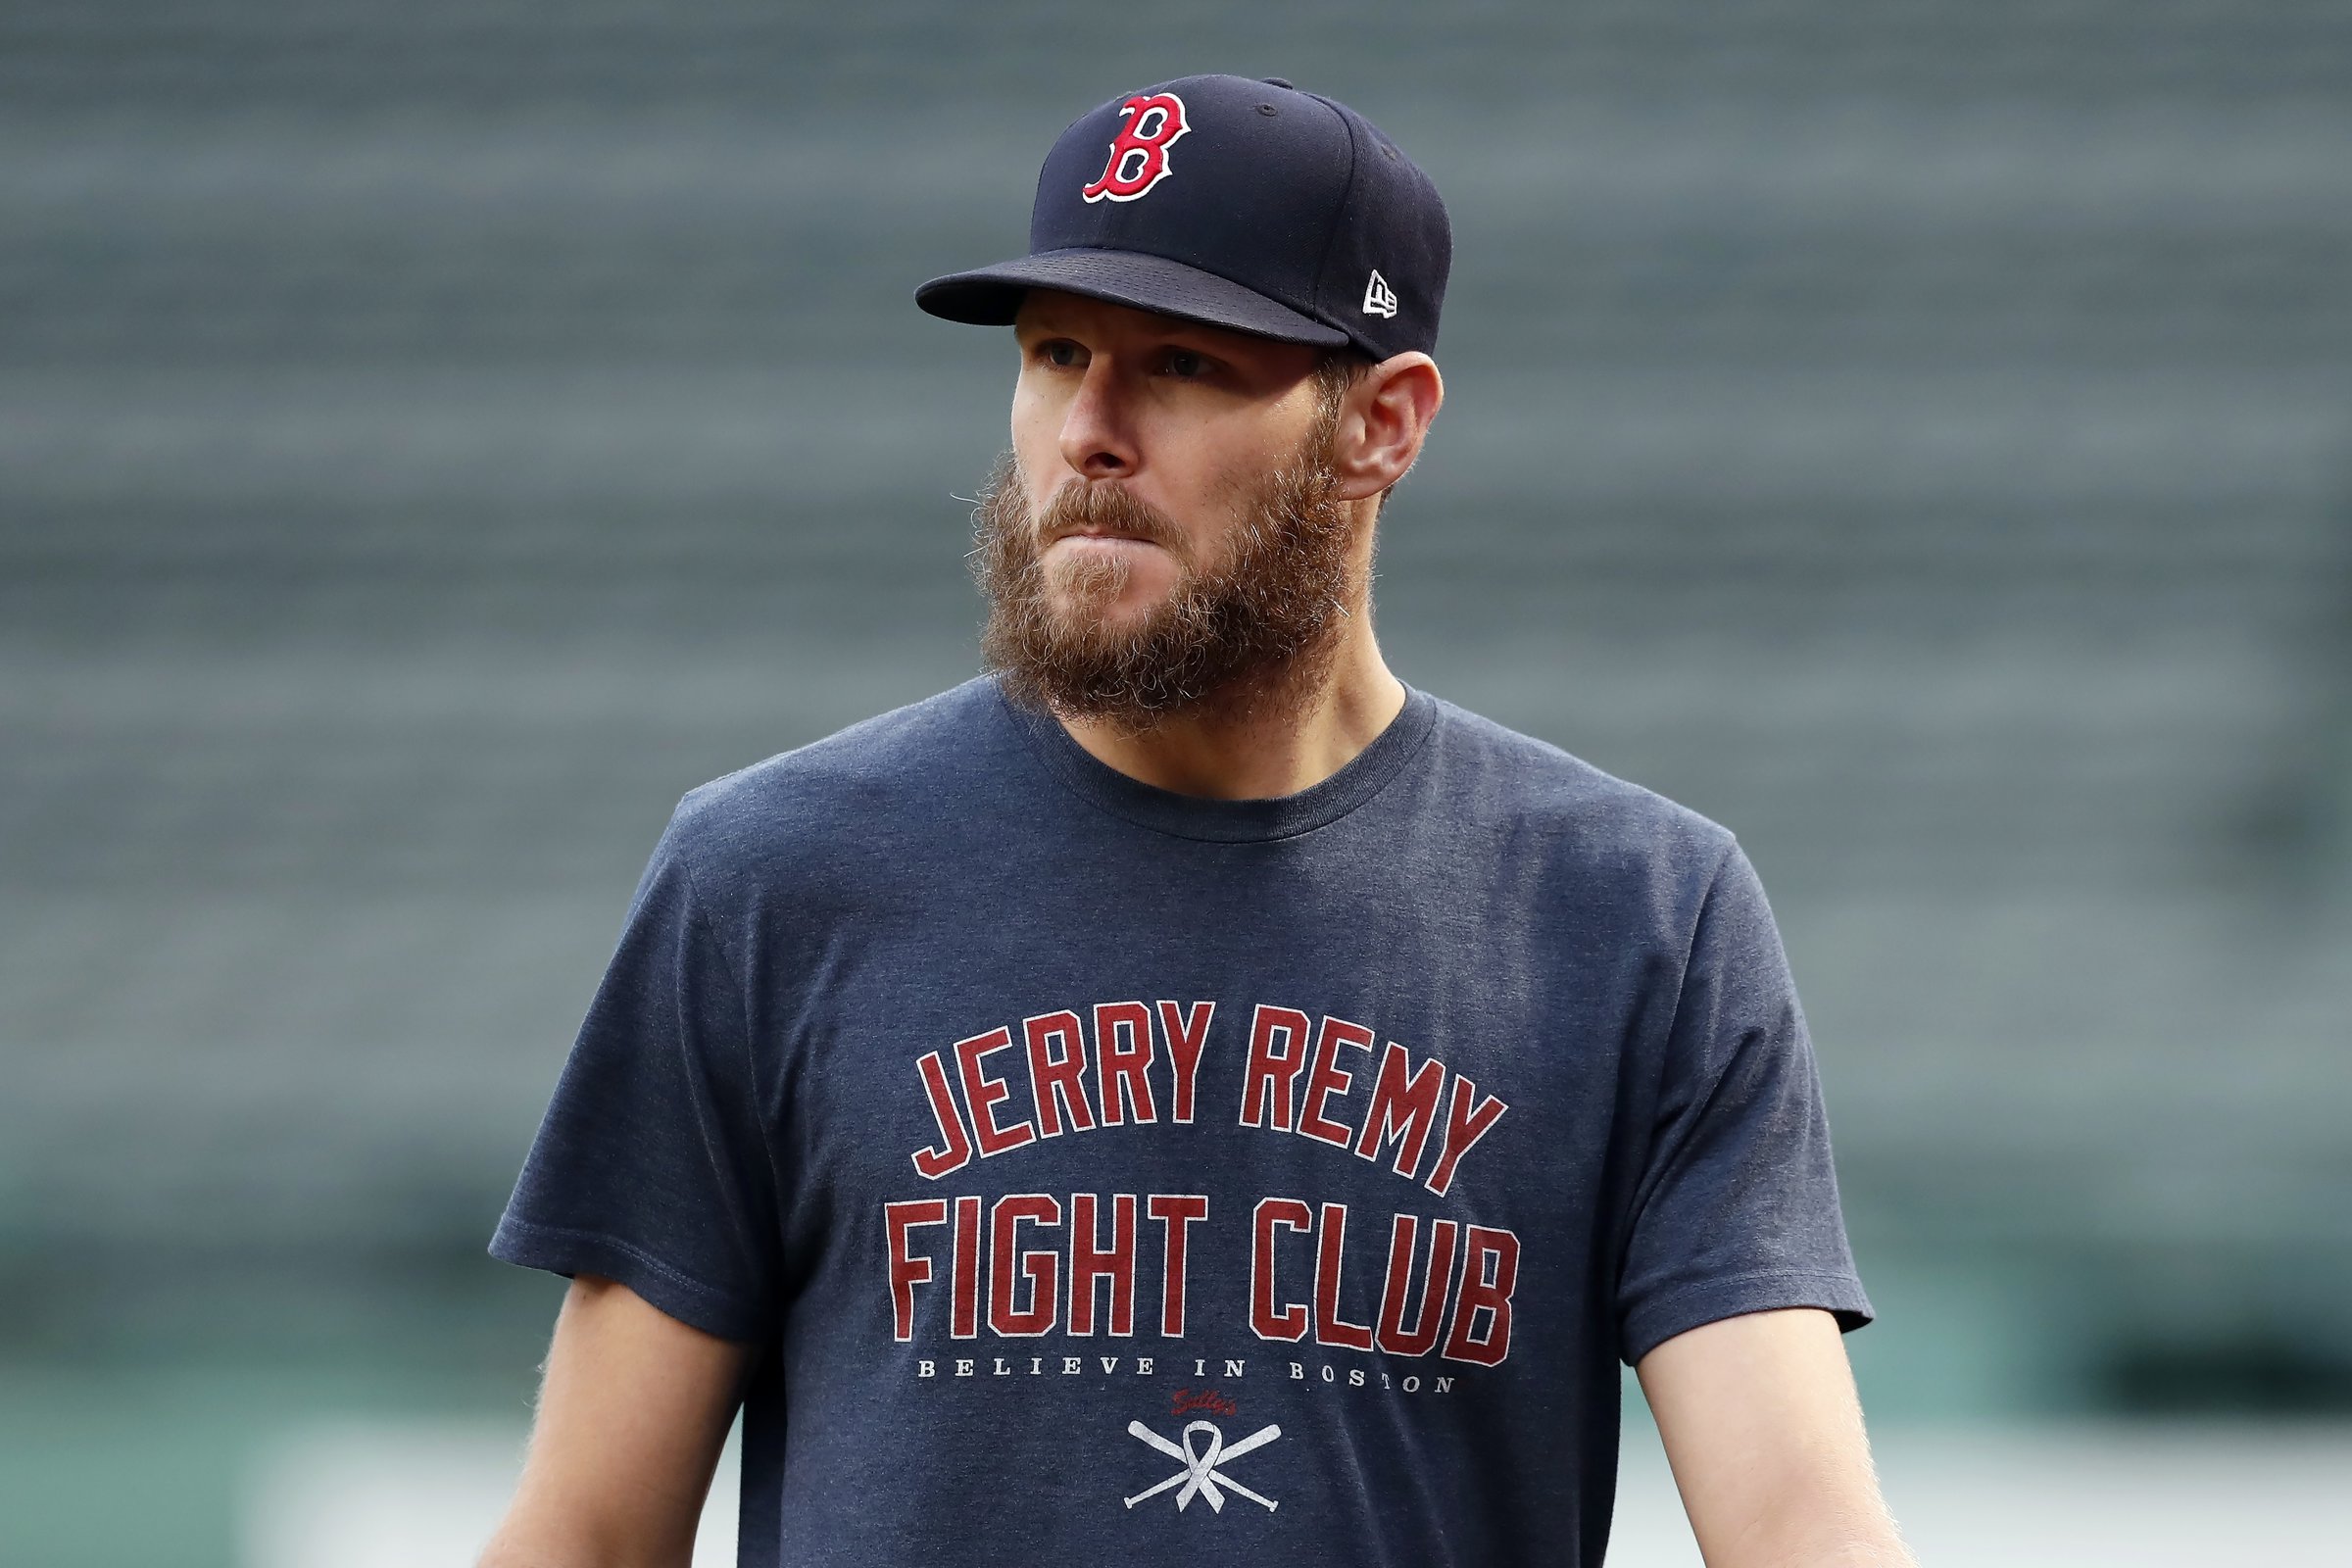 Red Sox Lefty Chris Sale Goes on IL for 6th Season in a Row – NBC